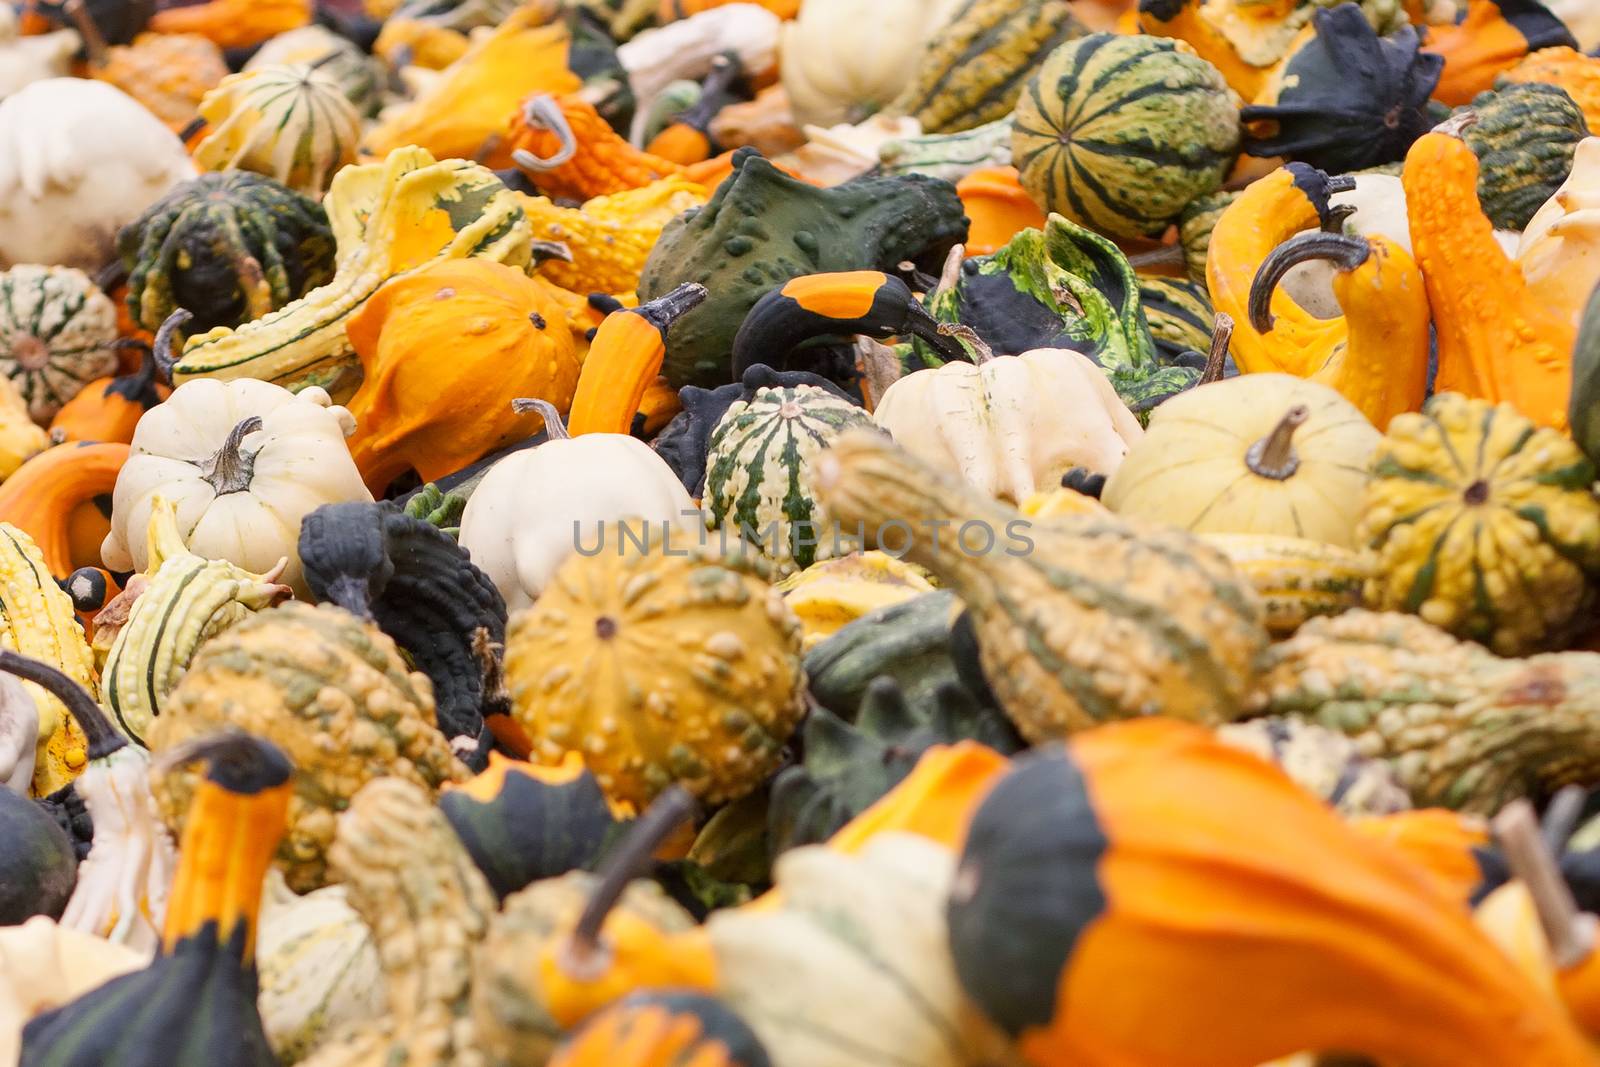 A pile of Gourds during the fall season.